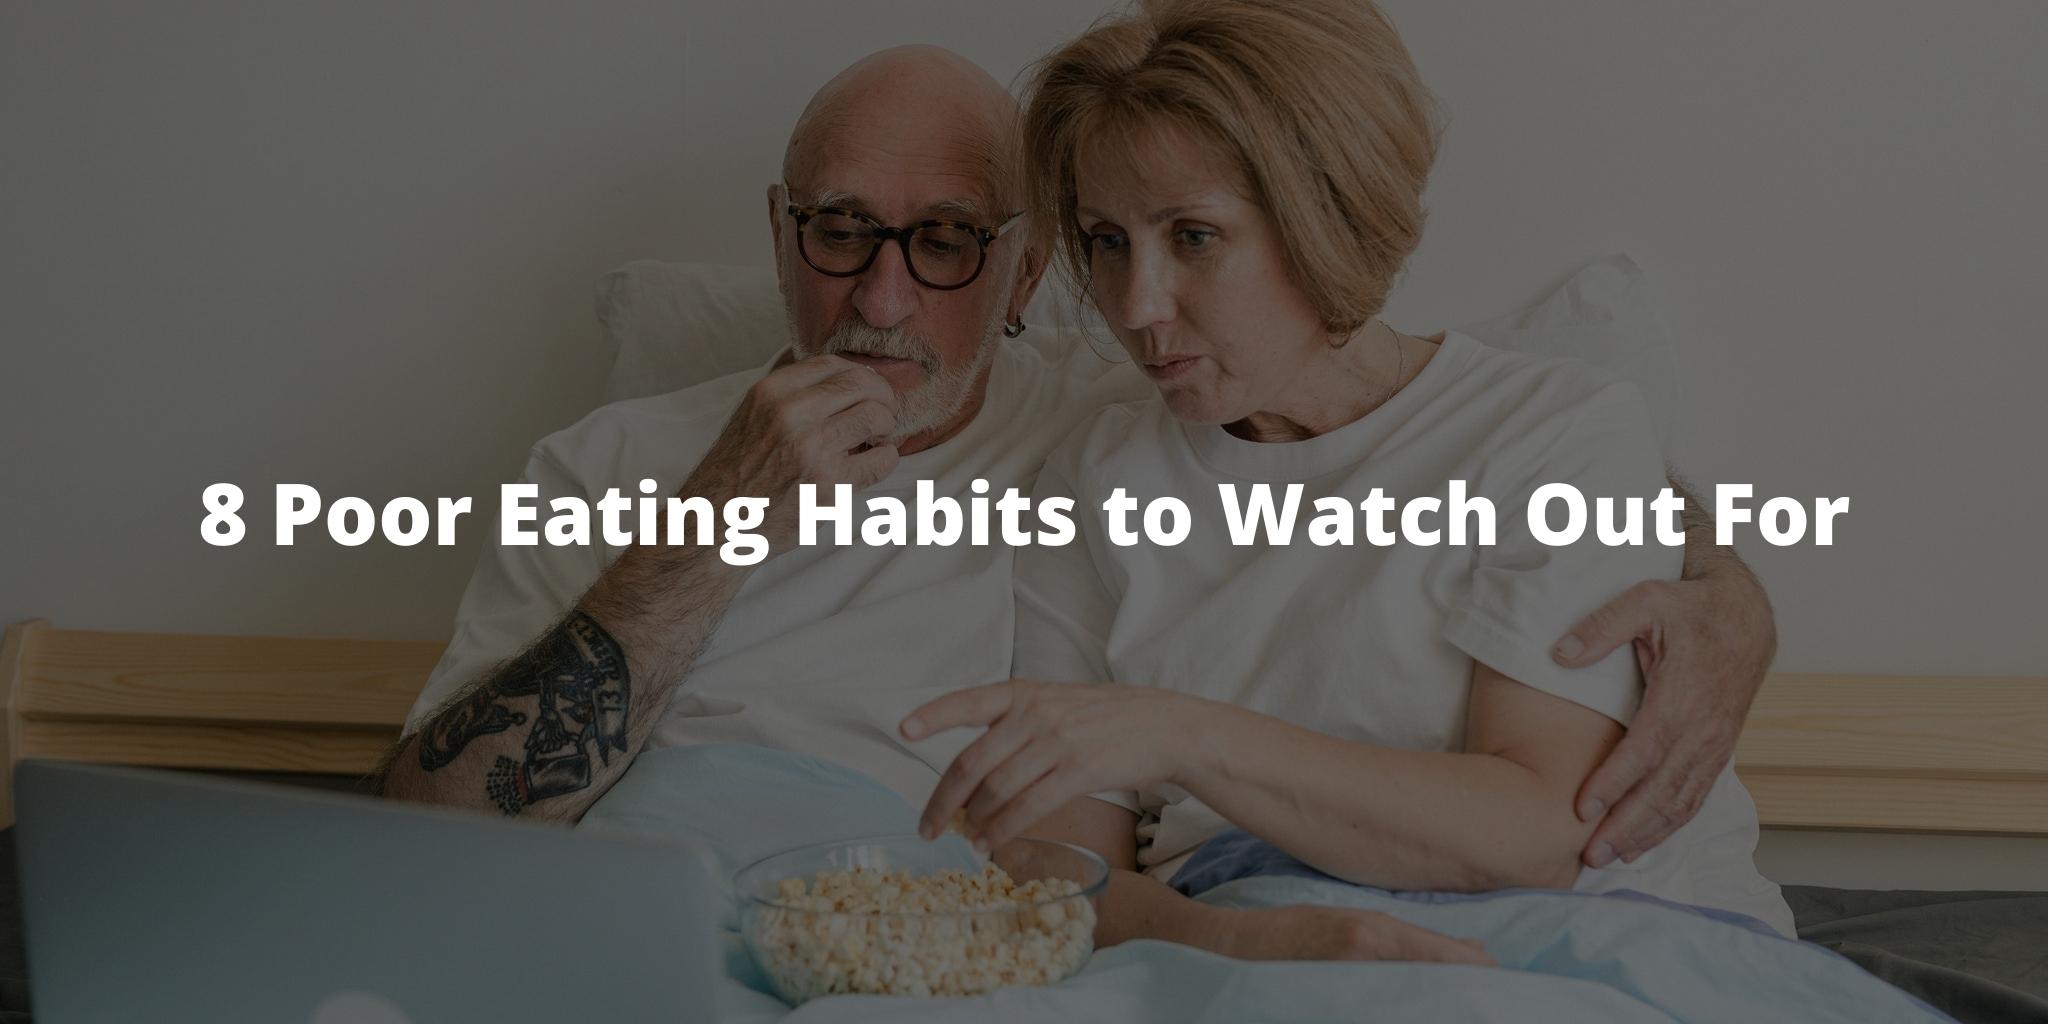 8 Poor Eating Habits to Watch Out For